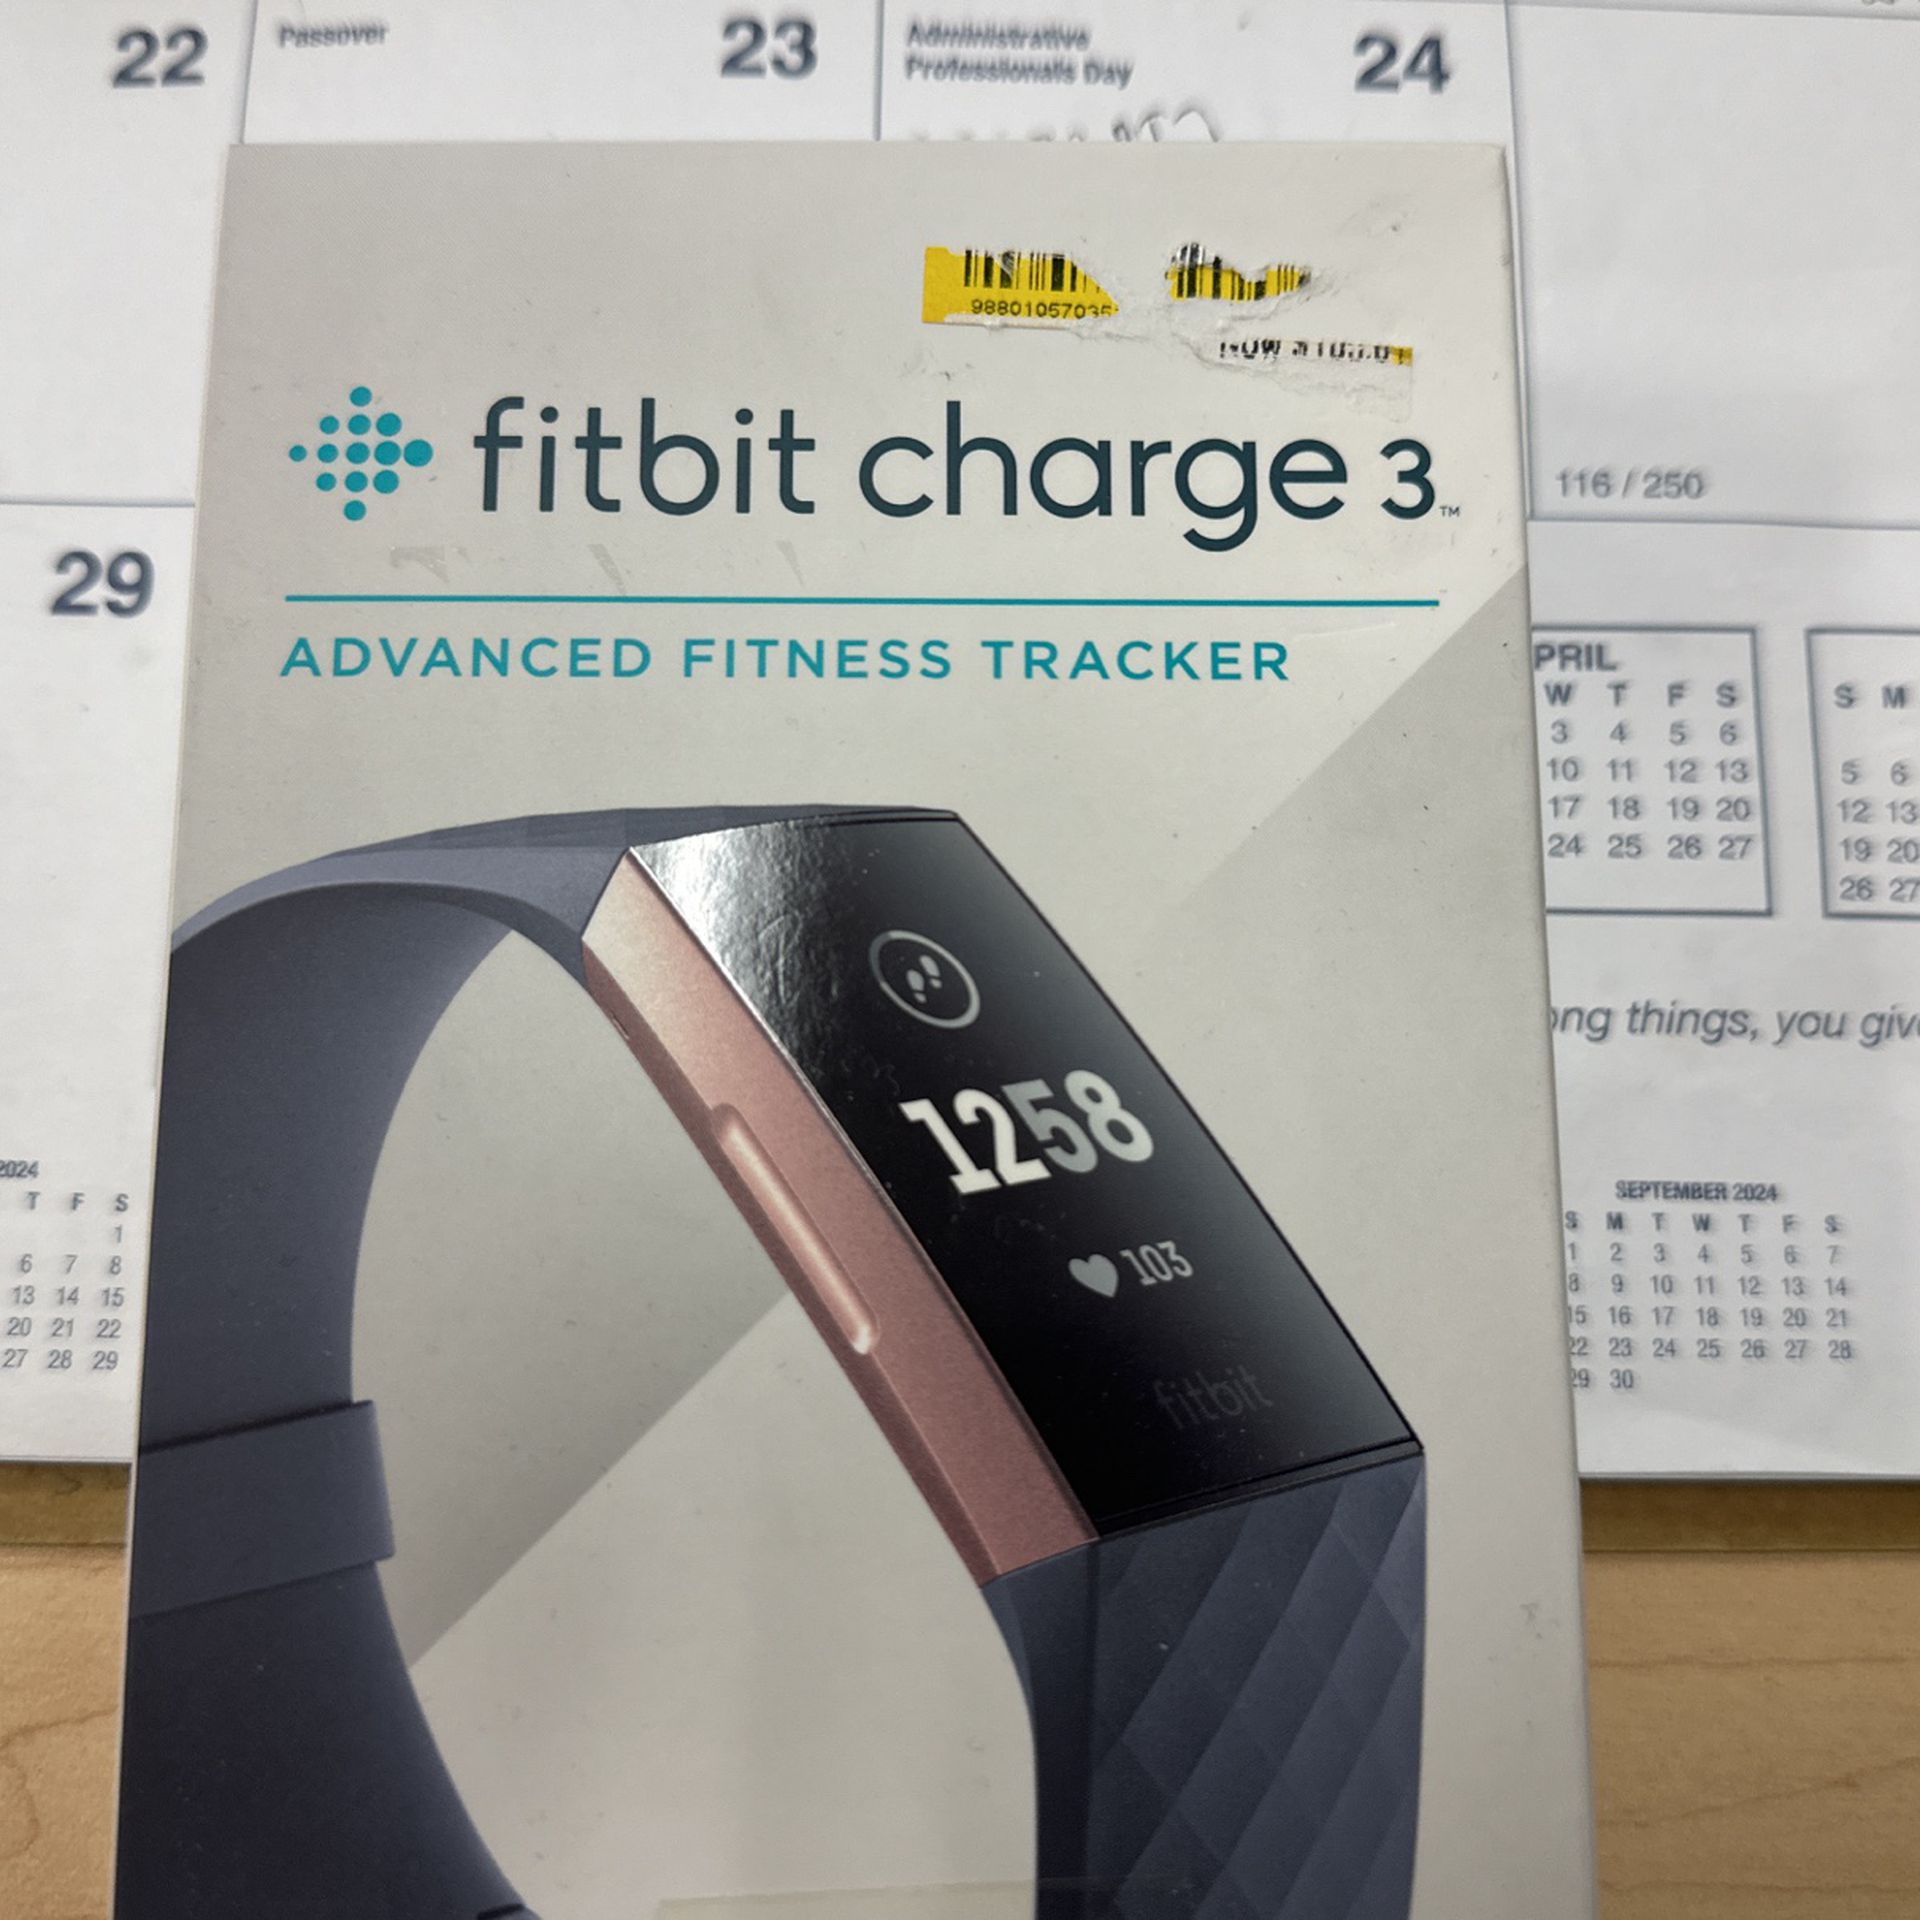 Brand New Fitbit Charger 3